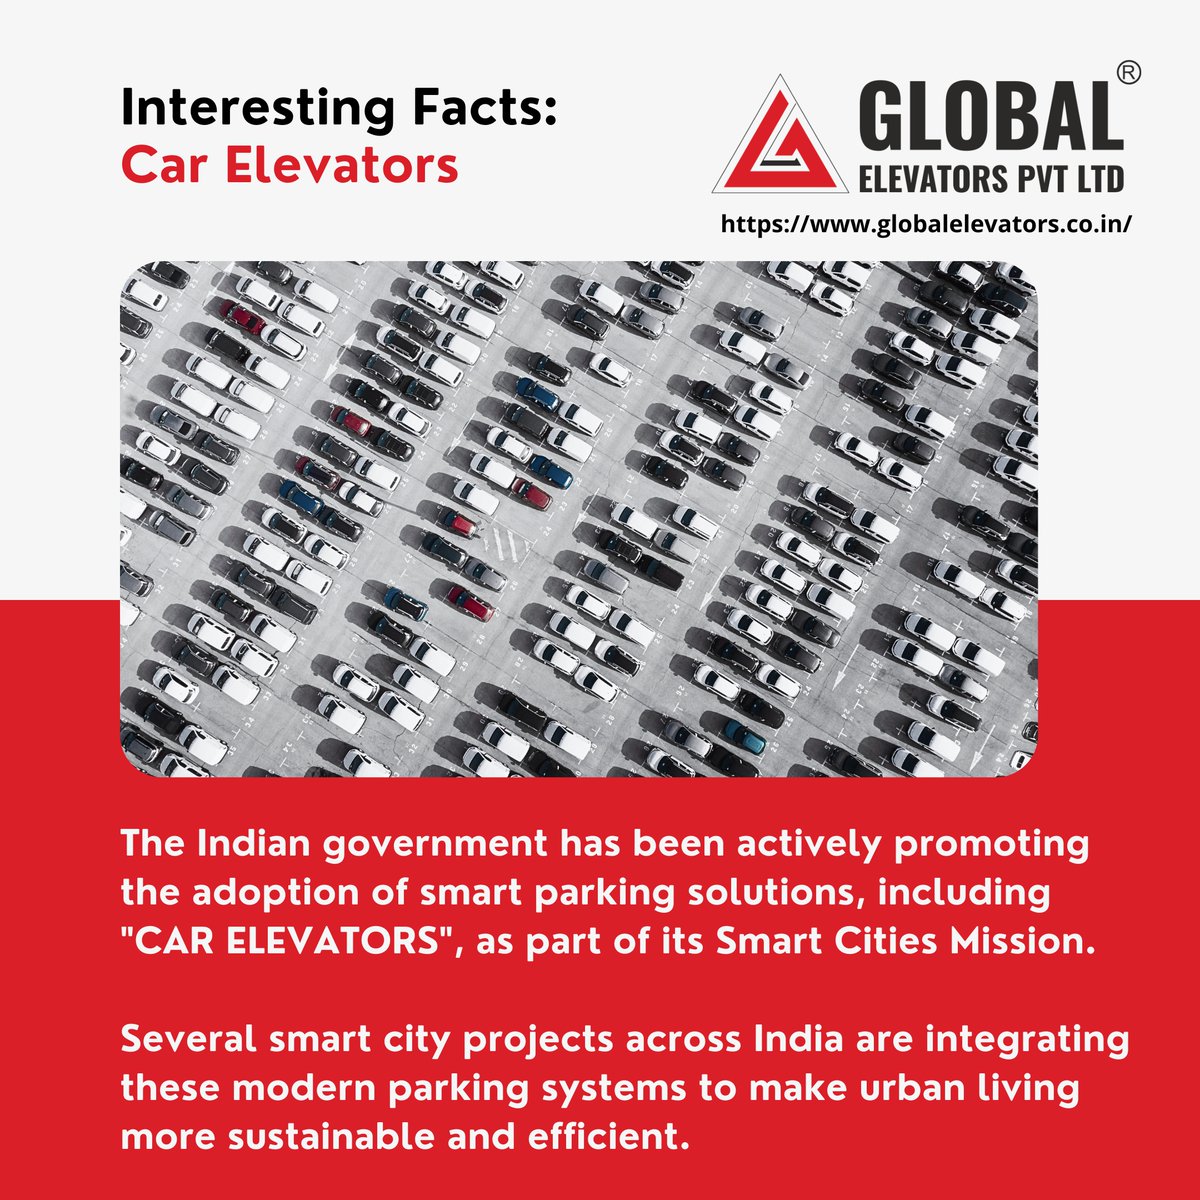 For all your elevator needs, please visit our website: globalelevators.co.in
or send us a mail at: info@globalelevators.in

#globalelevators #SmartCitiesMission #CarElevators #UrbanSustainability #EfficientParking #ModernParking #SmartCityProjects